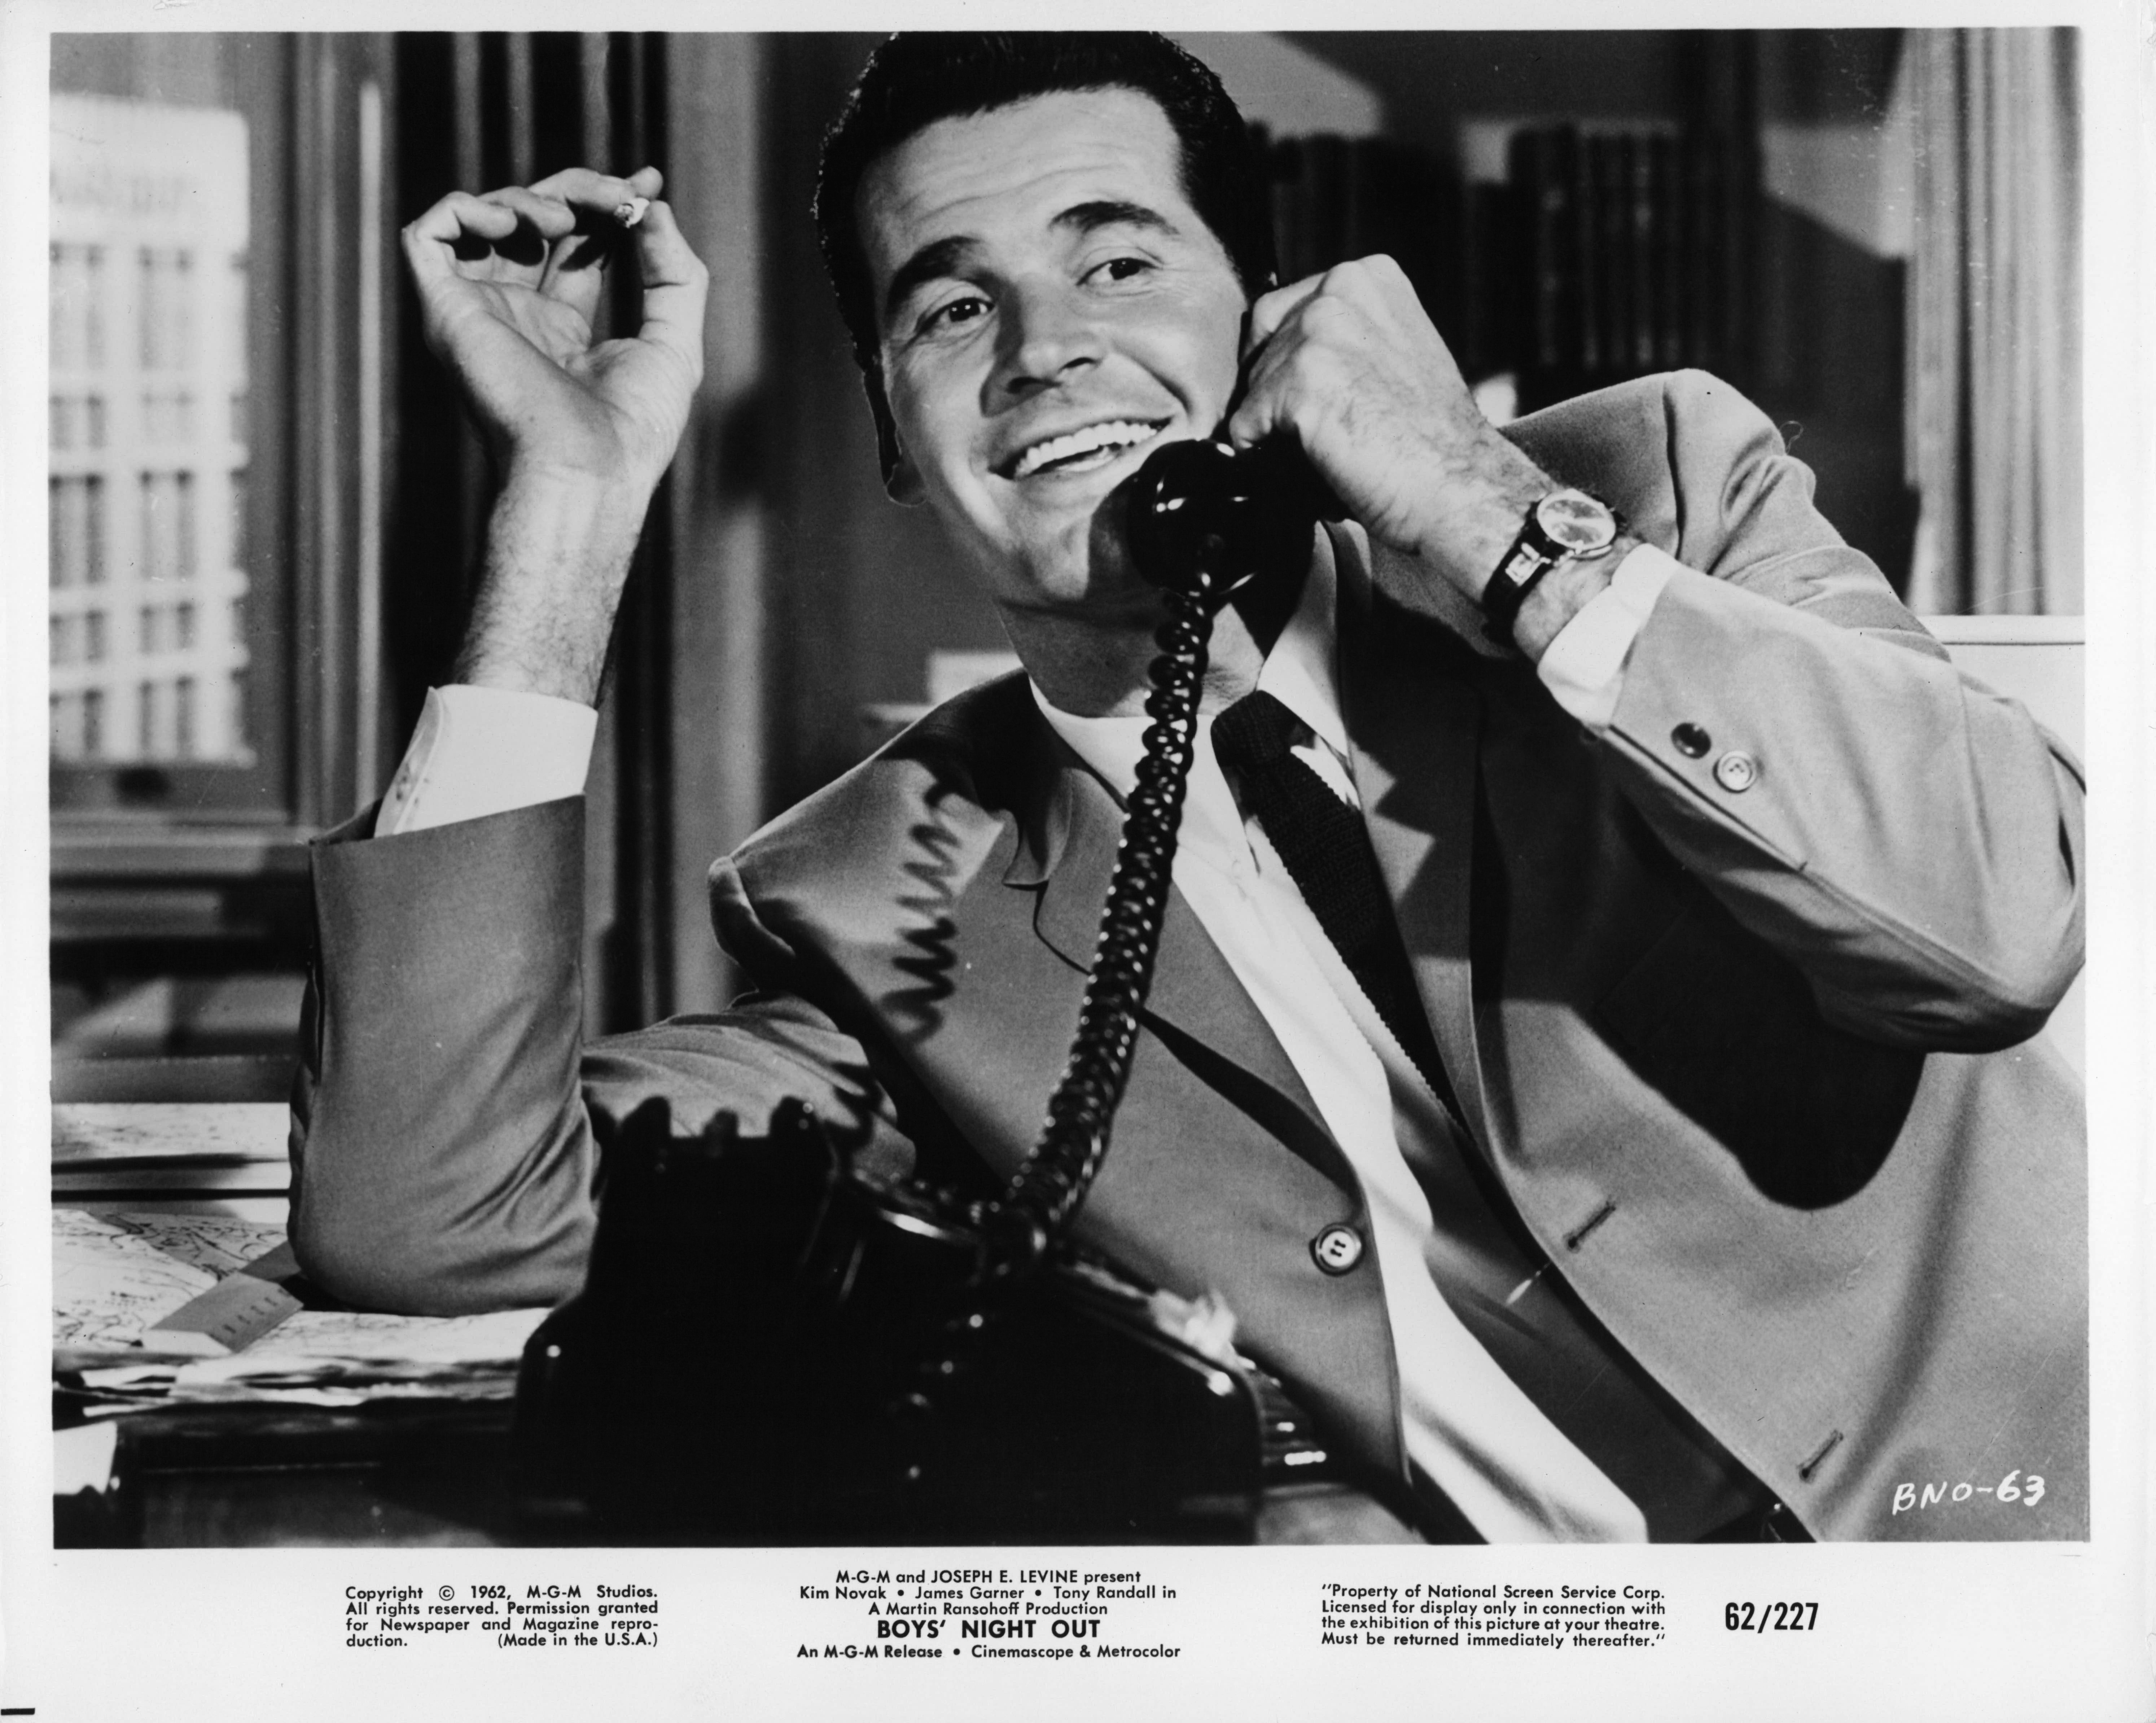 James Garner as Fred Williams in the 1962 movie "Boys' Night Out" | Source: Getty Images